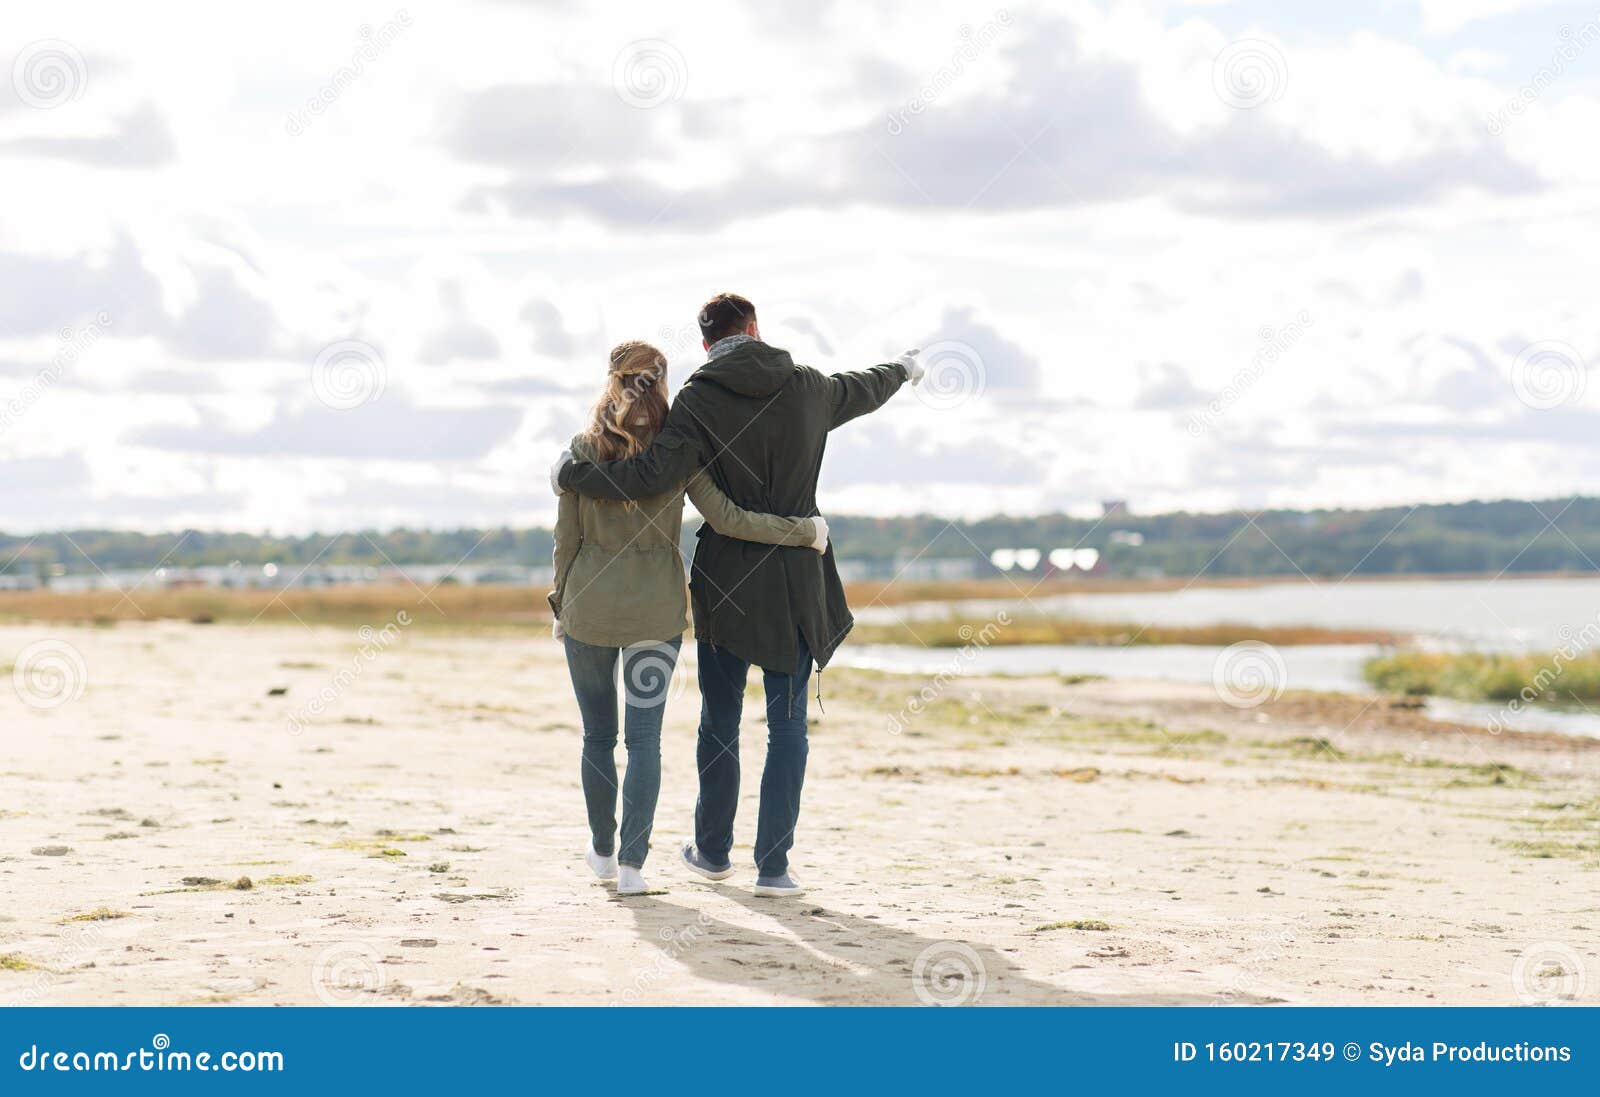 Couple Walking Along Autumn Beach and Hugging Stock Image - Image of ...